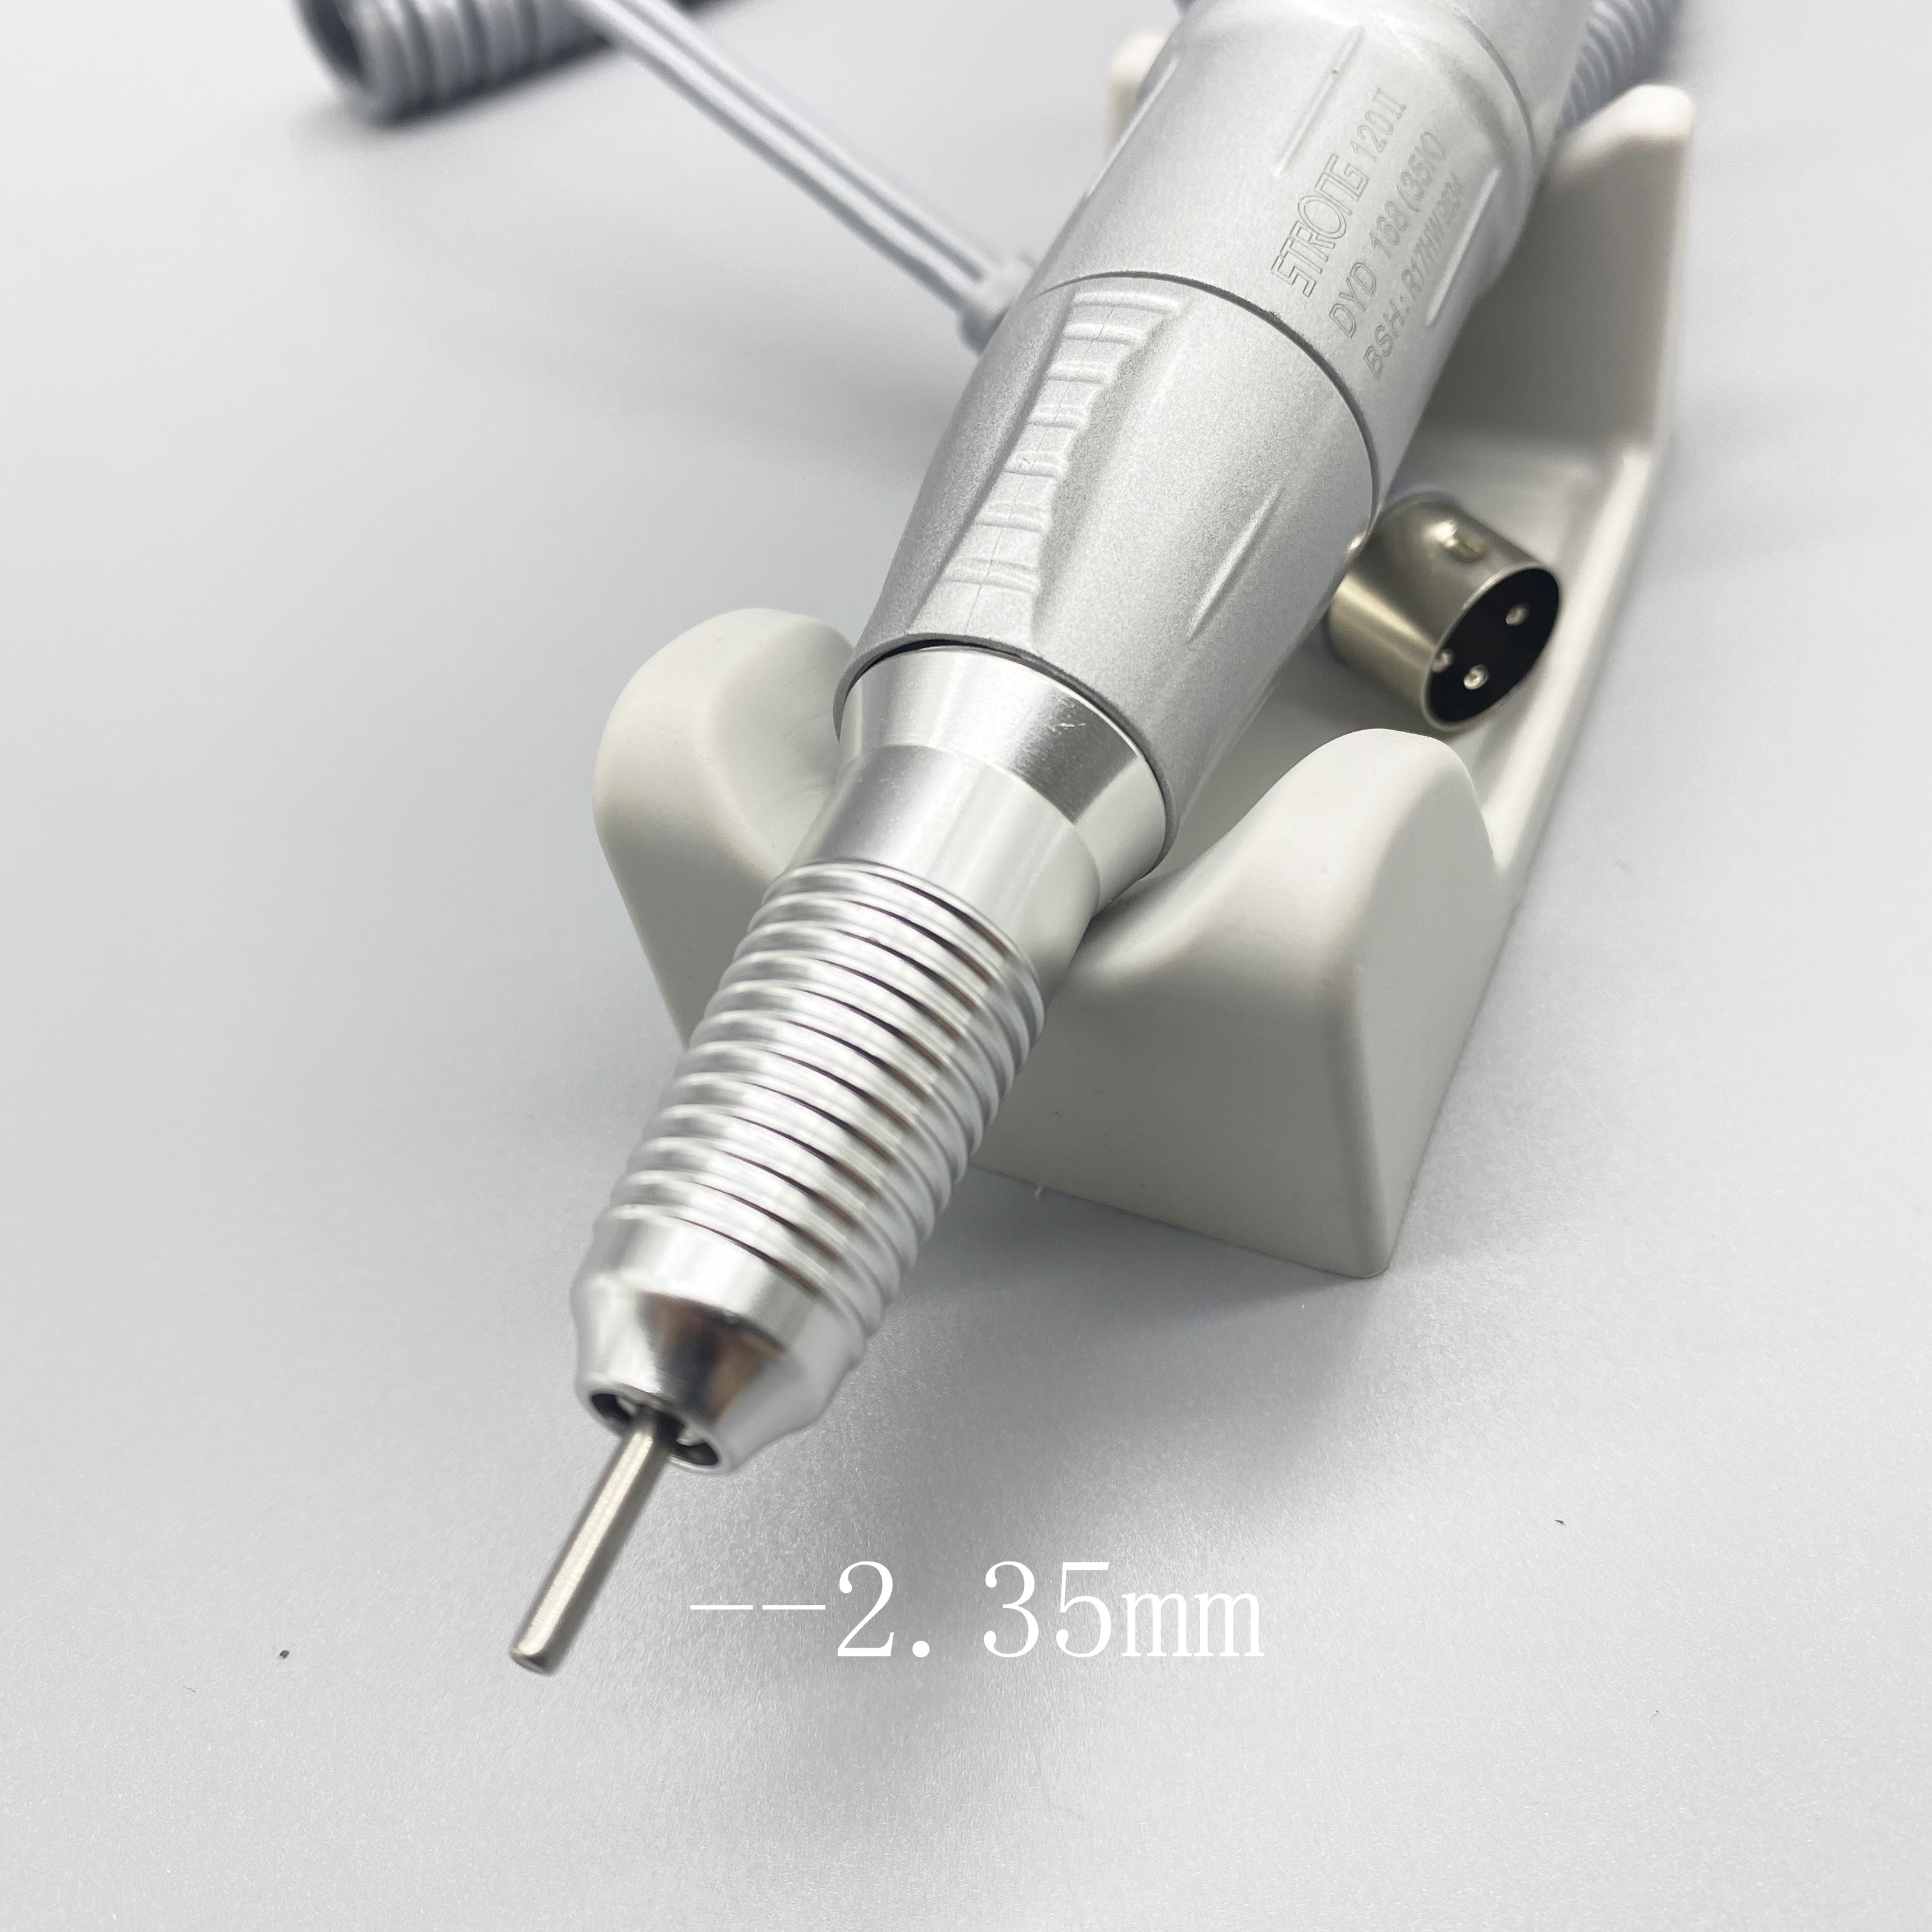 Strong 120 35,000RPM 102L-2.35 handle manicure dril Nails polisher Art pen 210 204 90 series Electric Nail Drills Machine Tools